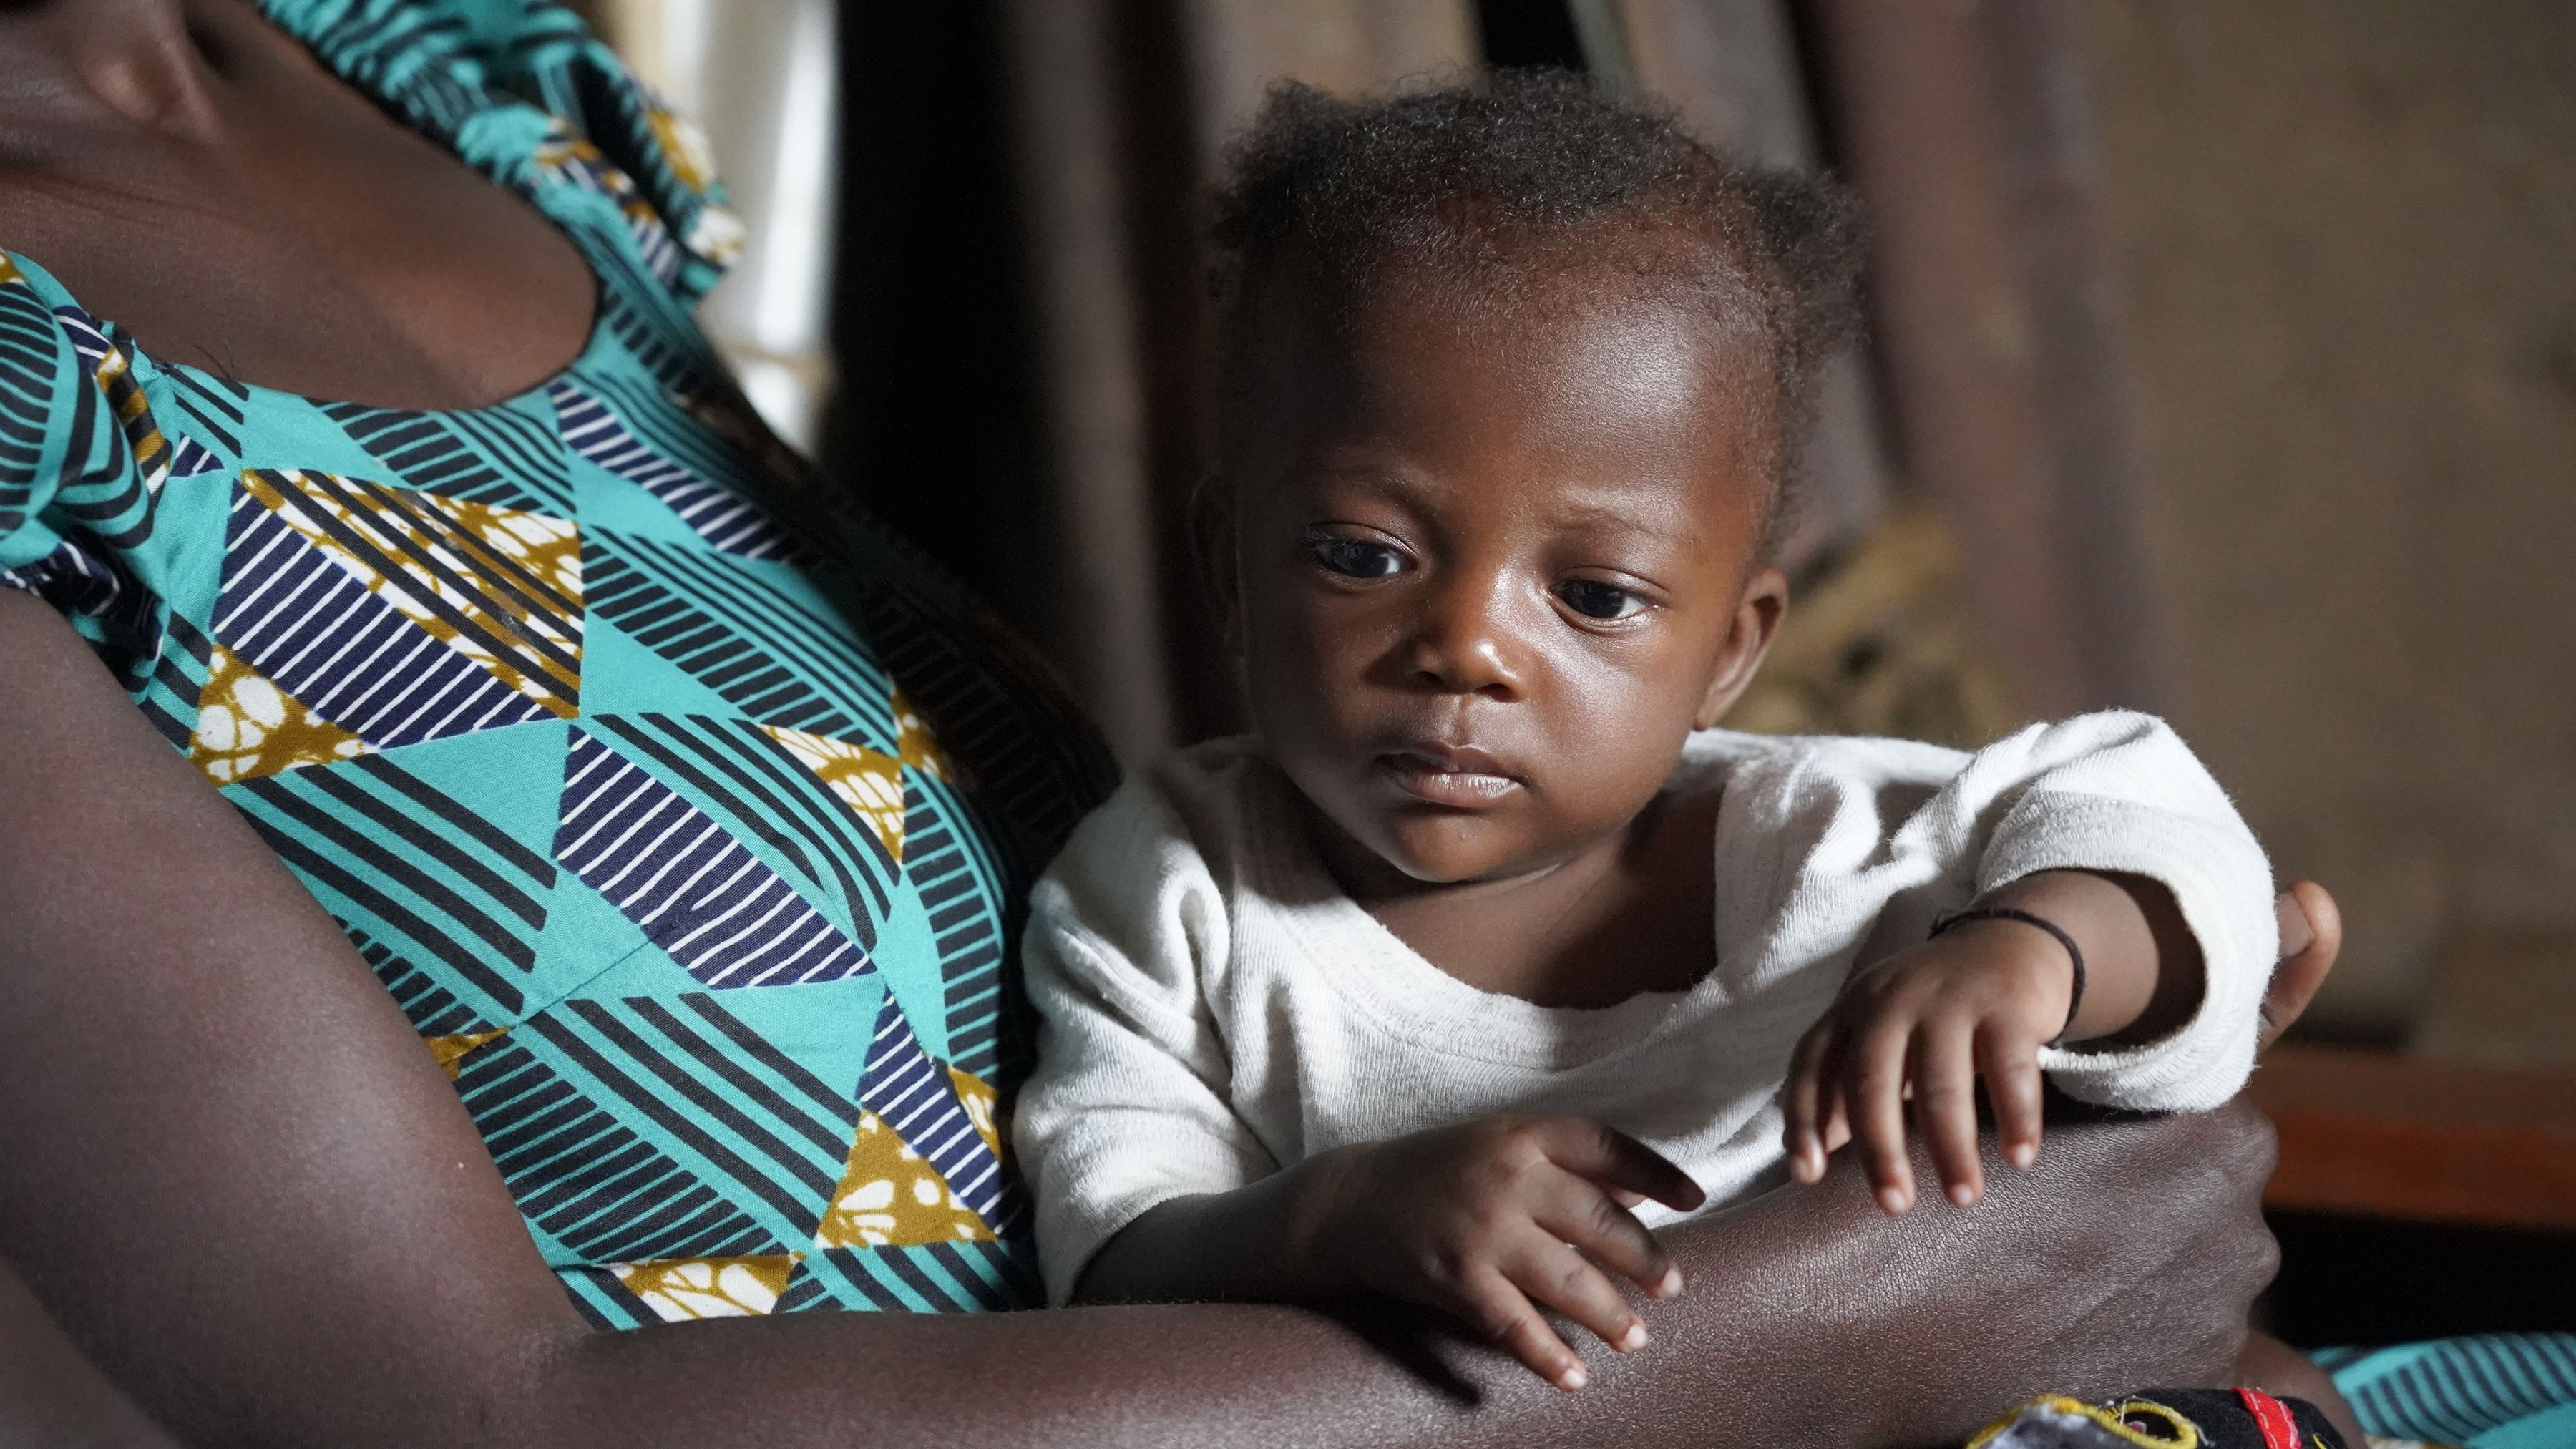 A 7 month old in the DRC sits in the loving arms of his mum